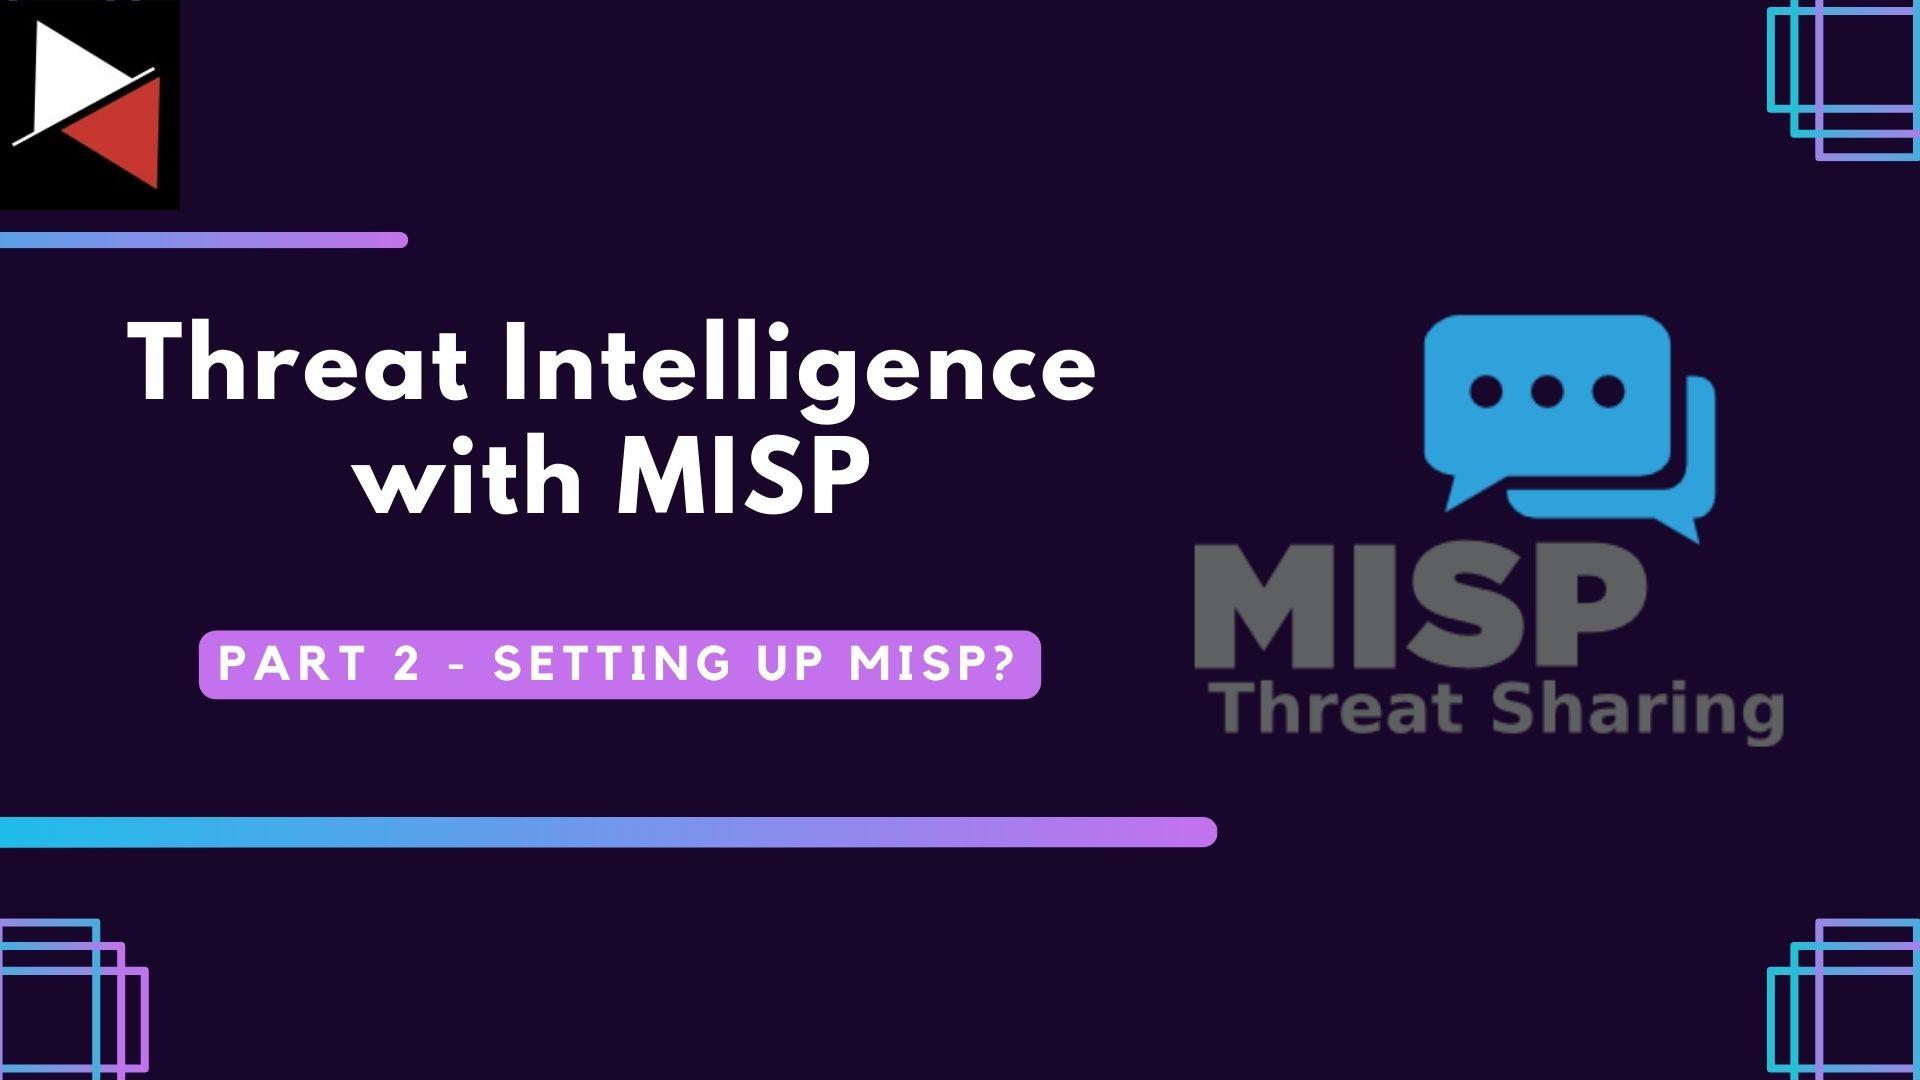 Threat Intelligence with MISP: Part 2 - Setting up MISP